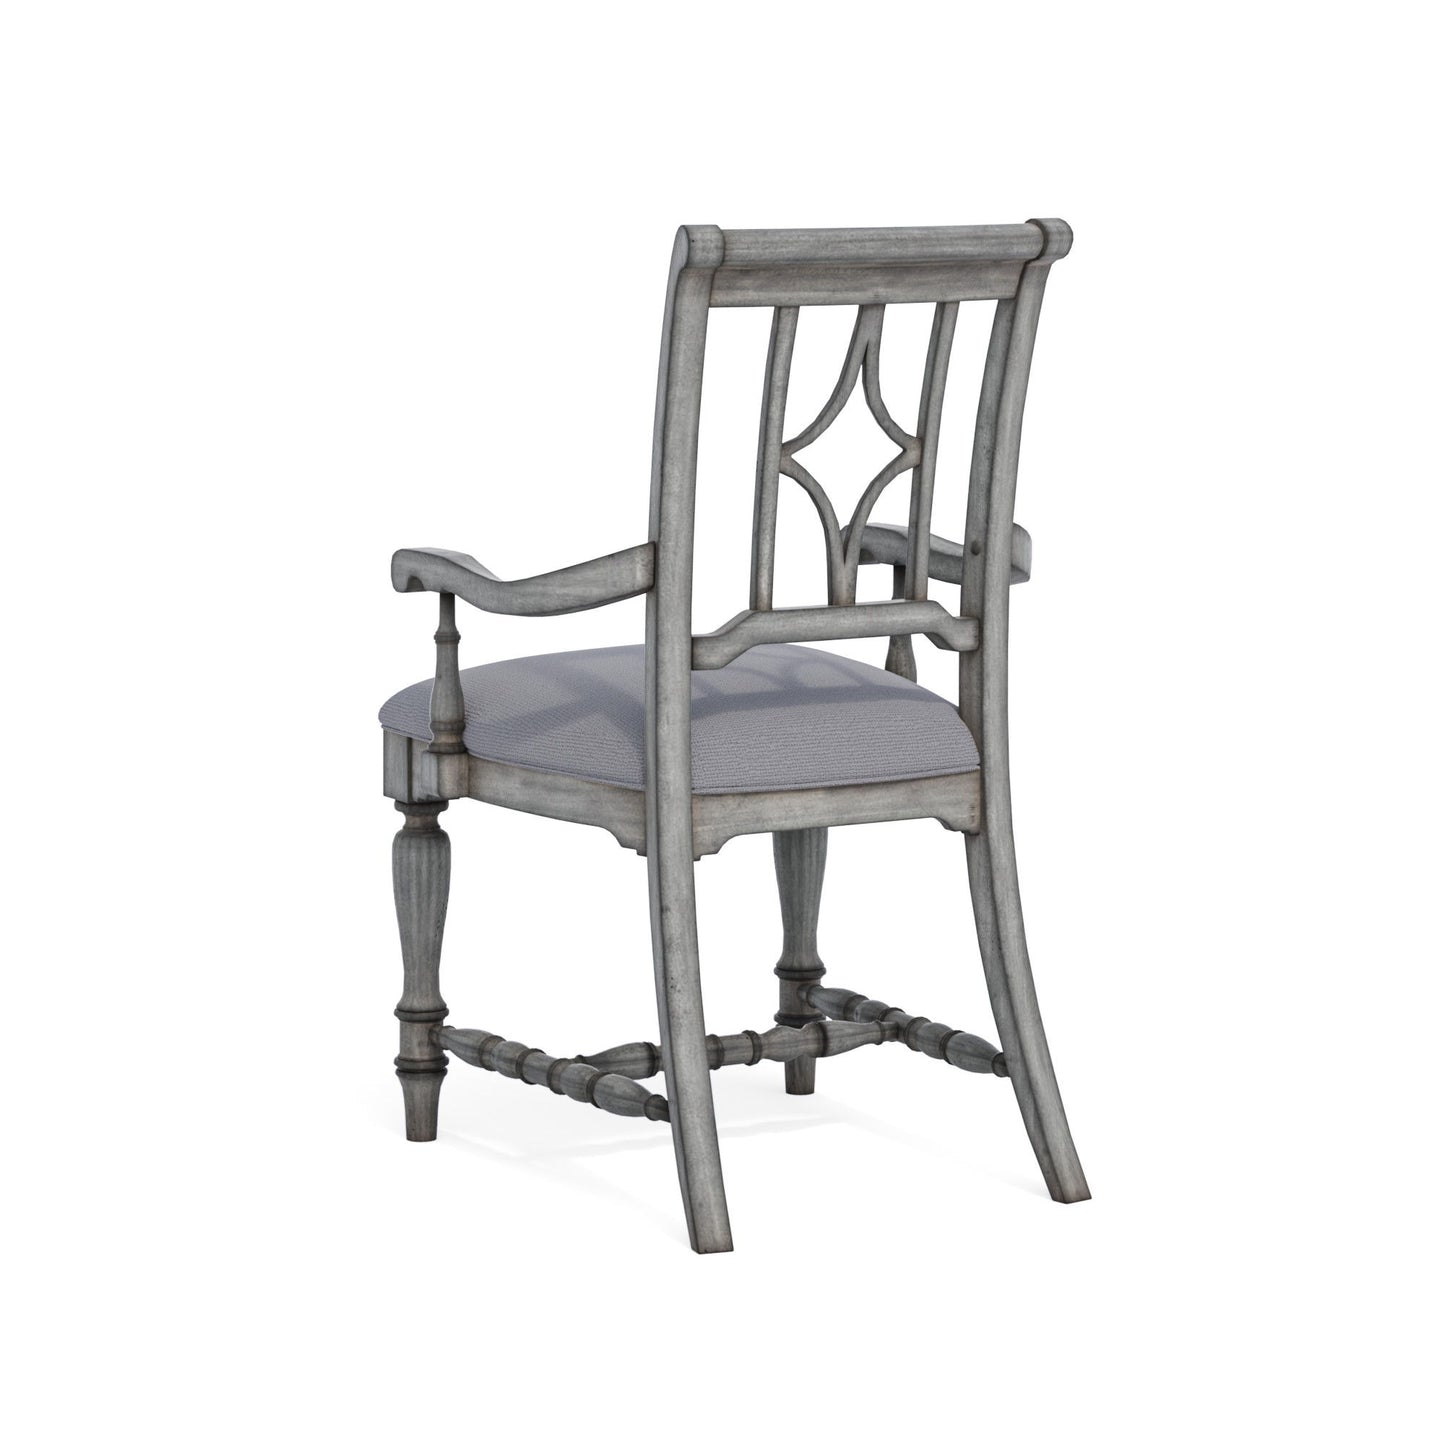 Plymouth - Upholstered Dining Chair